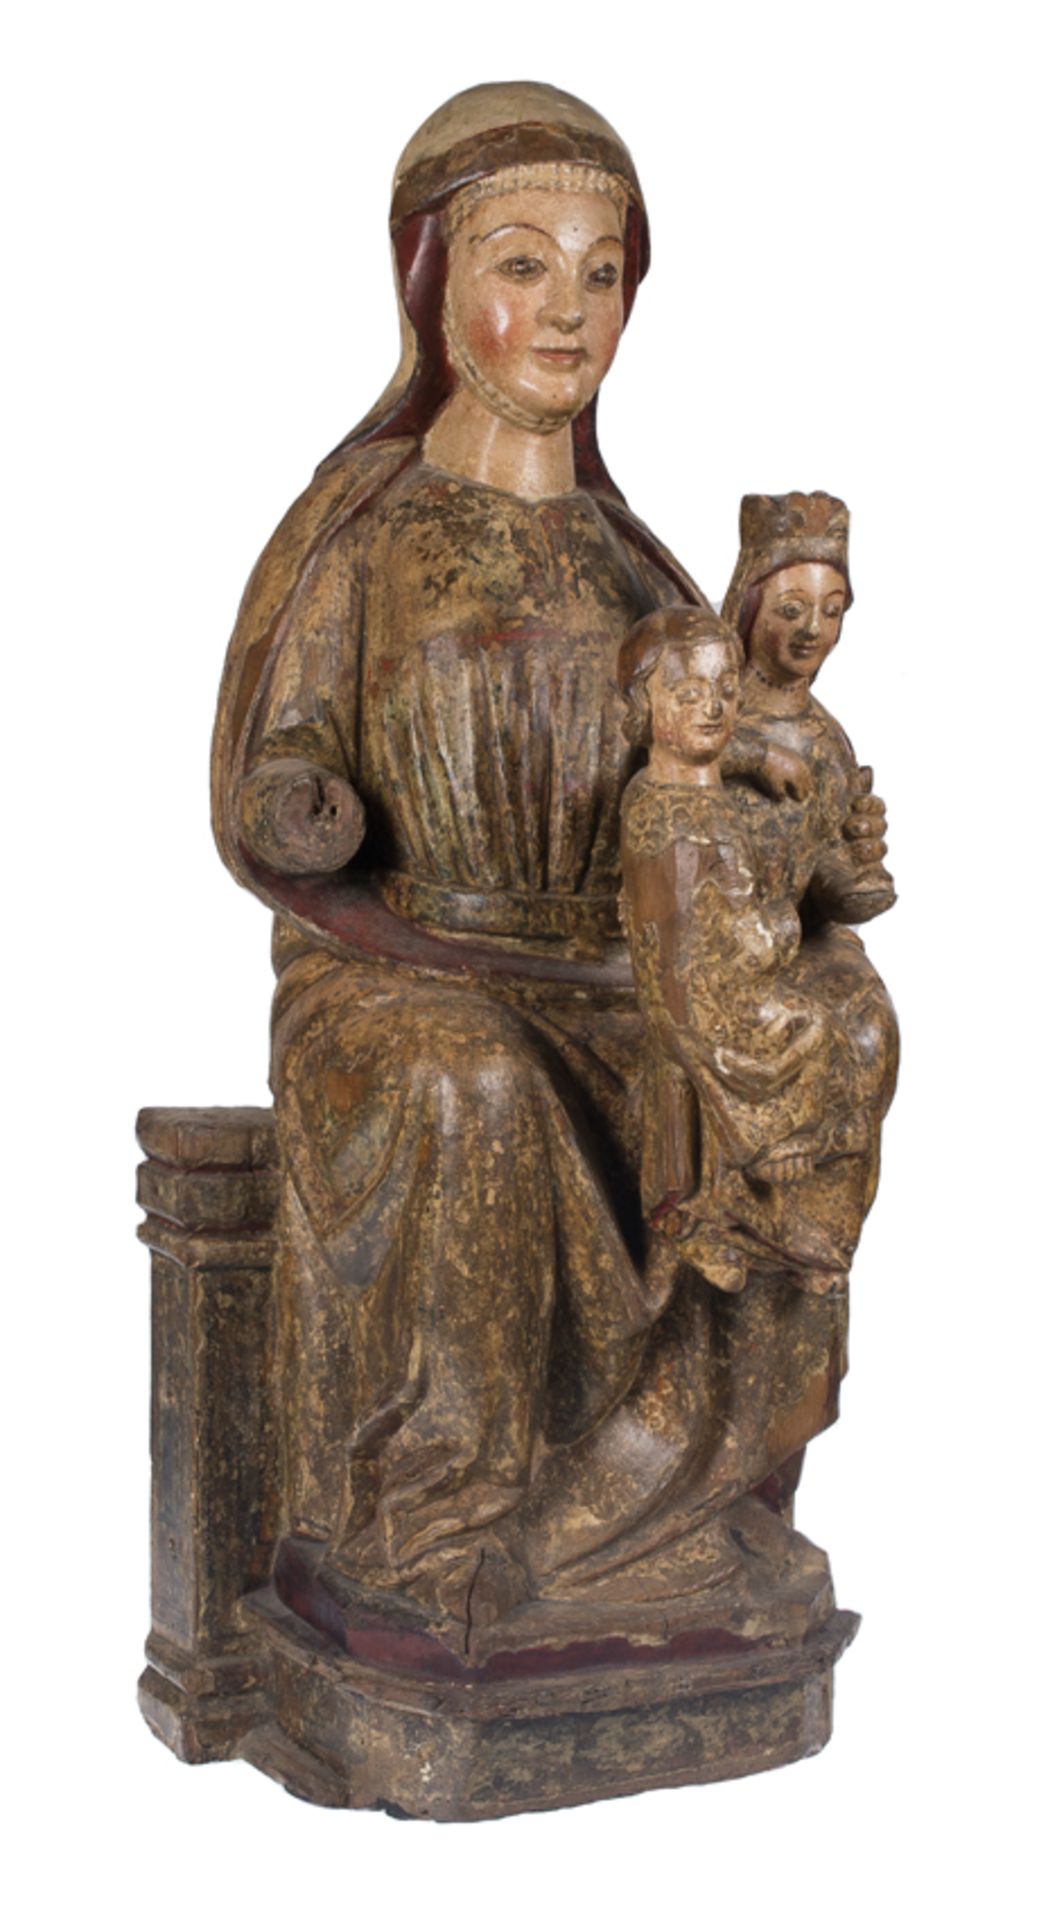 "Saint Anne Trinitarian". Carved, gilded and polychromed wooden sculpture. Gothic. 14th century.